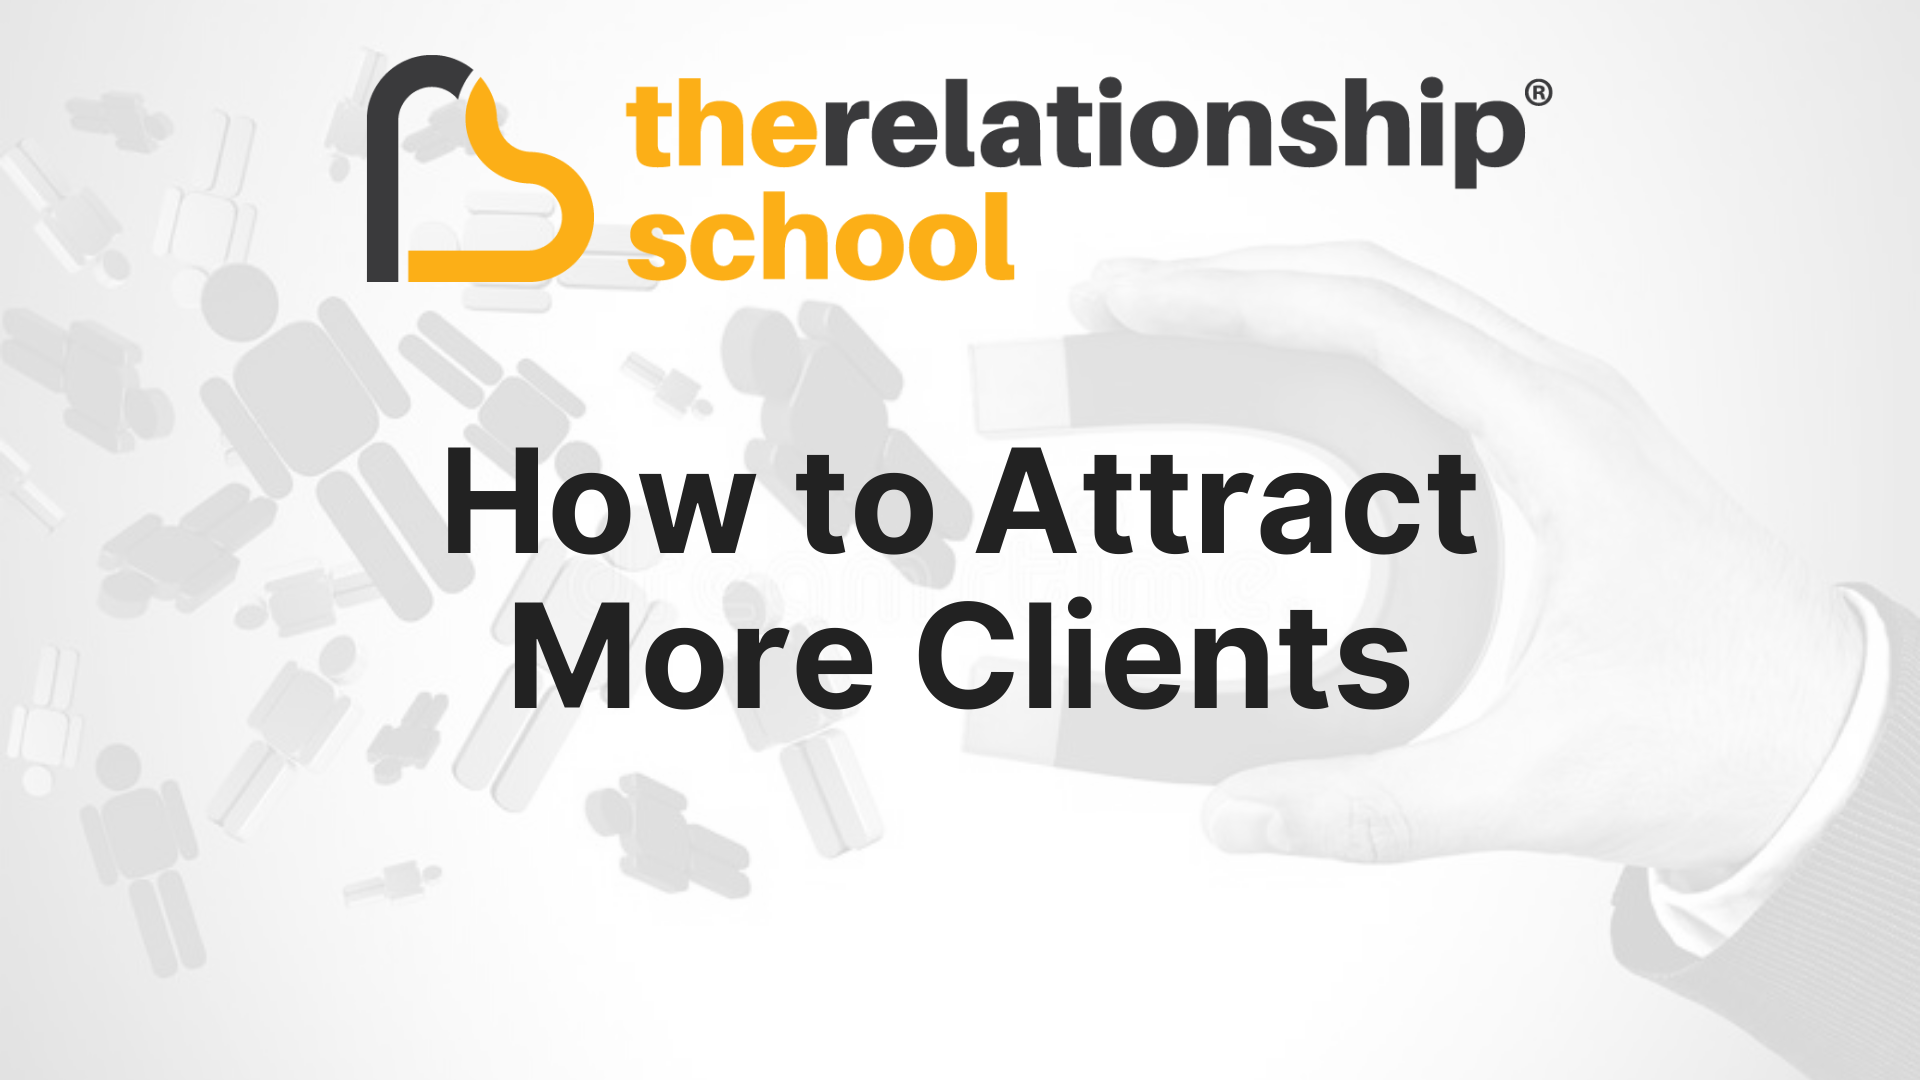 How to Attract More Clients